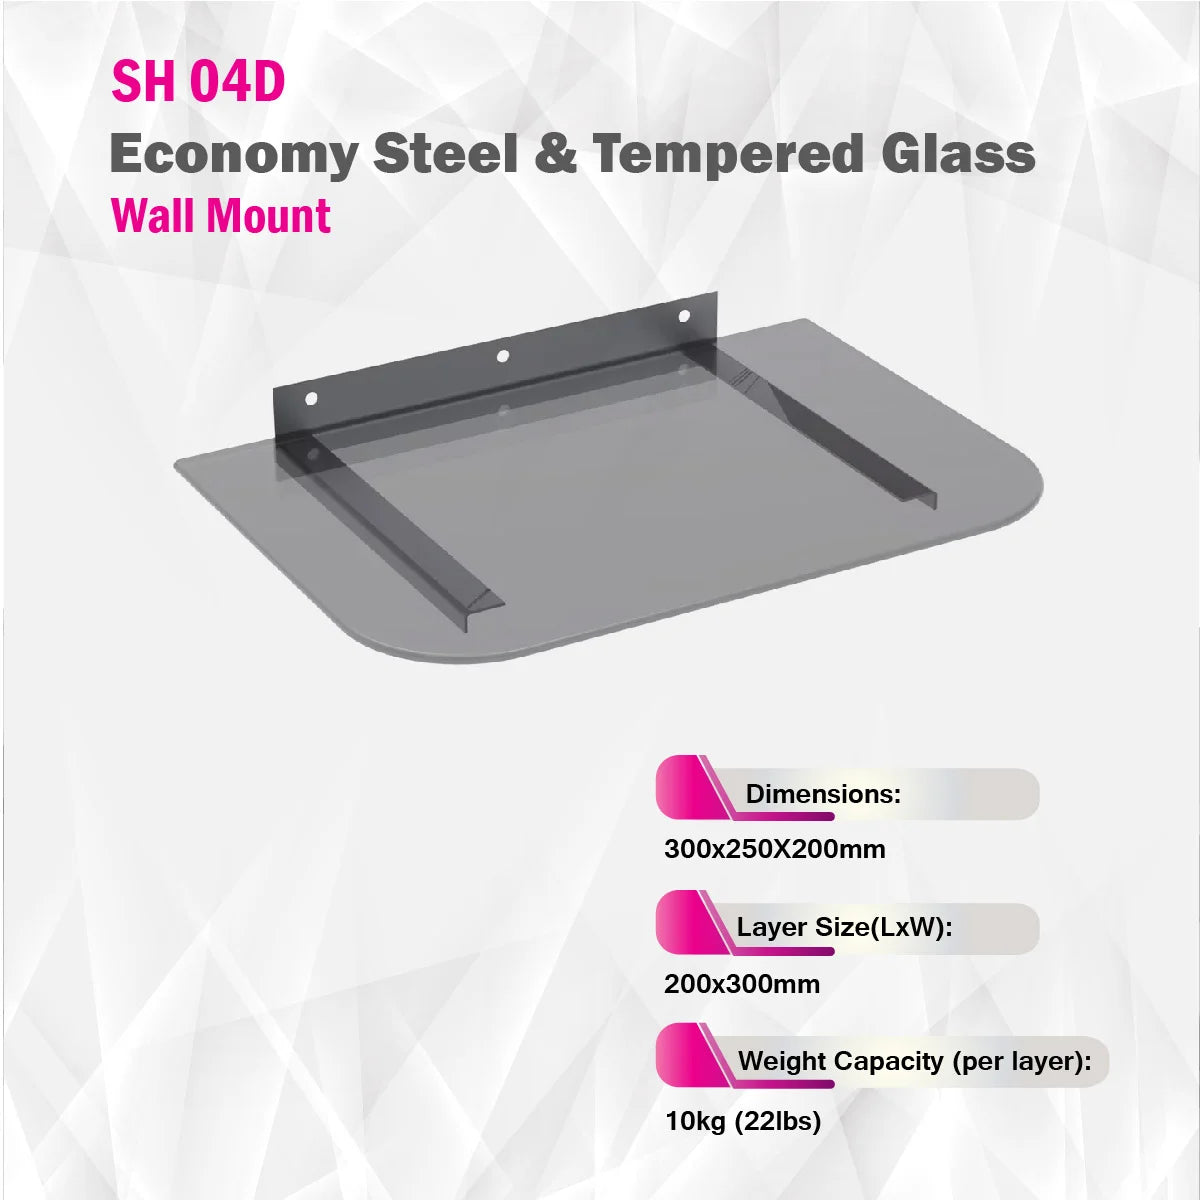 Skill Tech SH 04D - Economy Steel & Tempered Glass Wall Mount